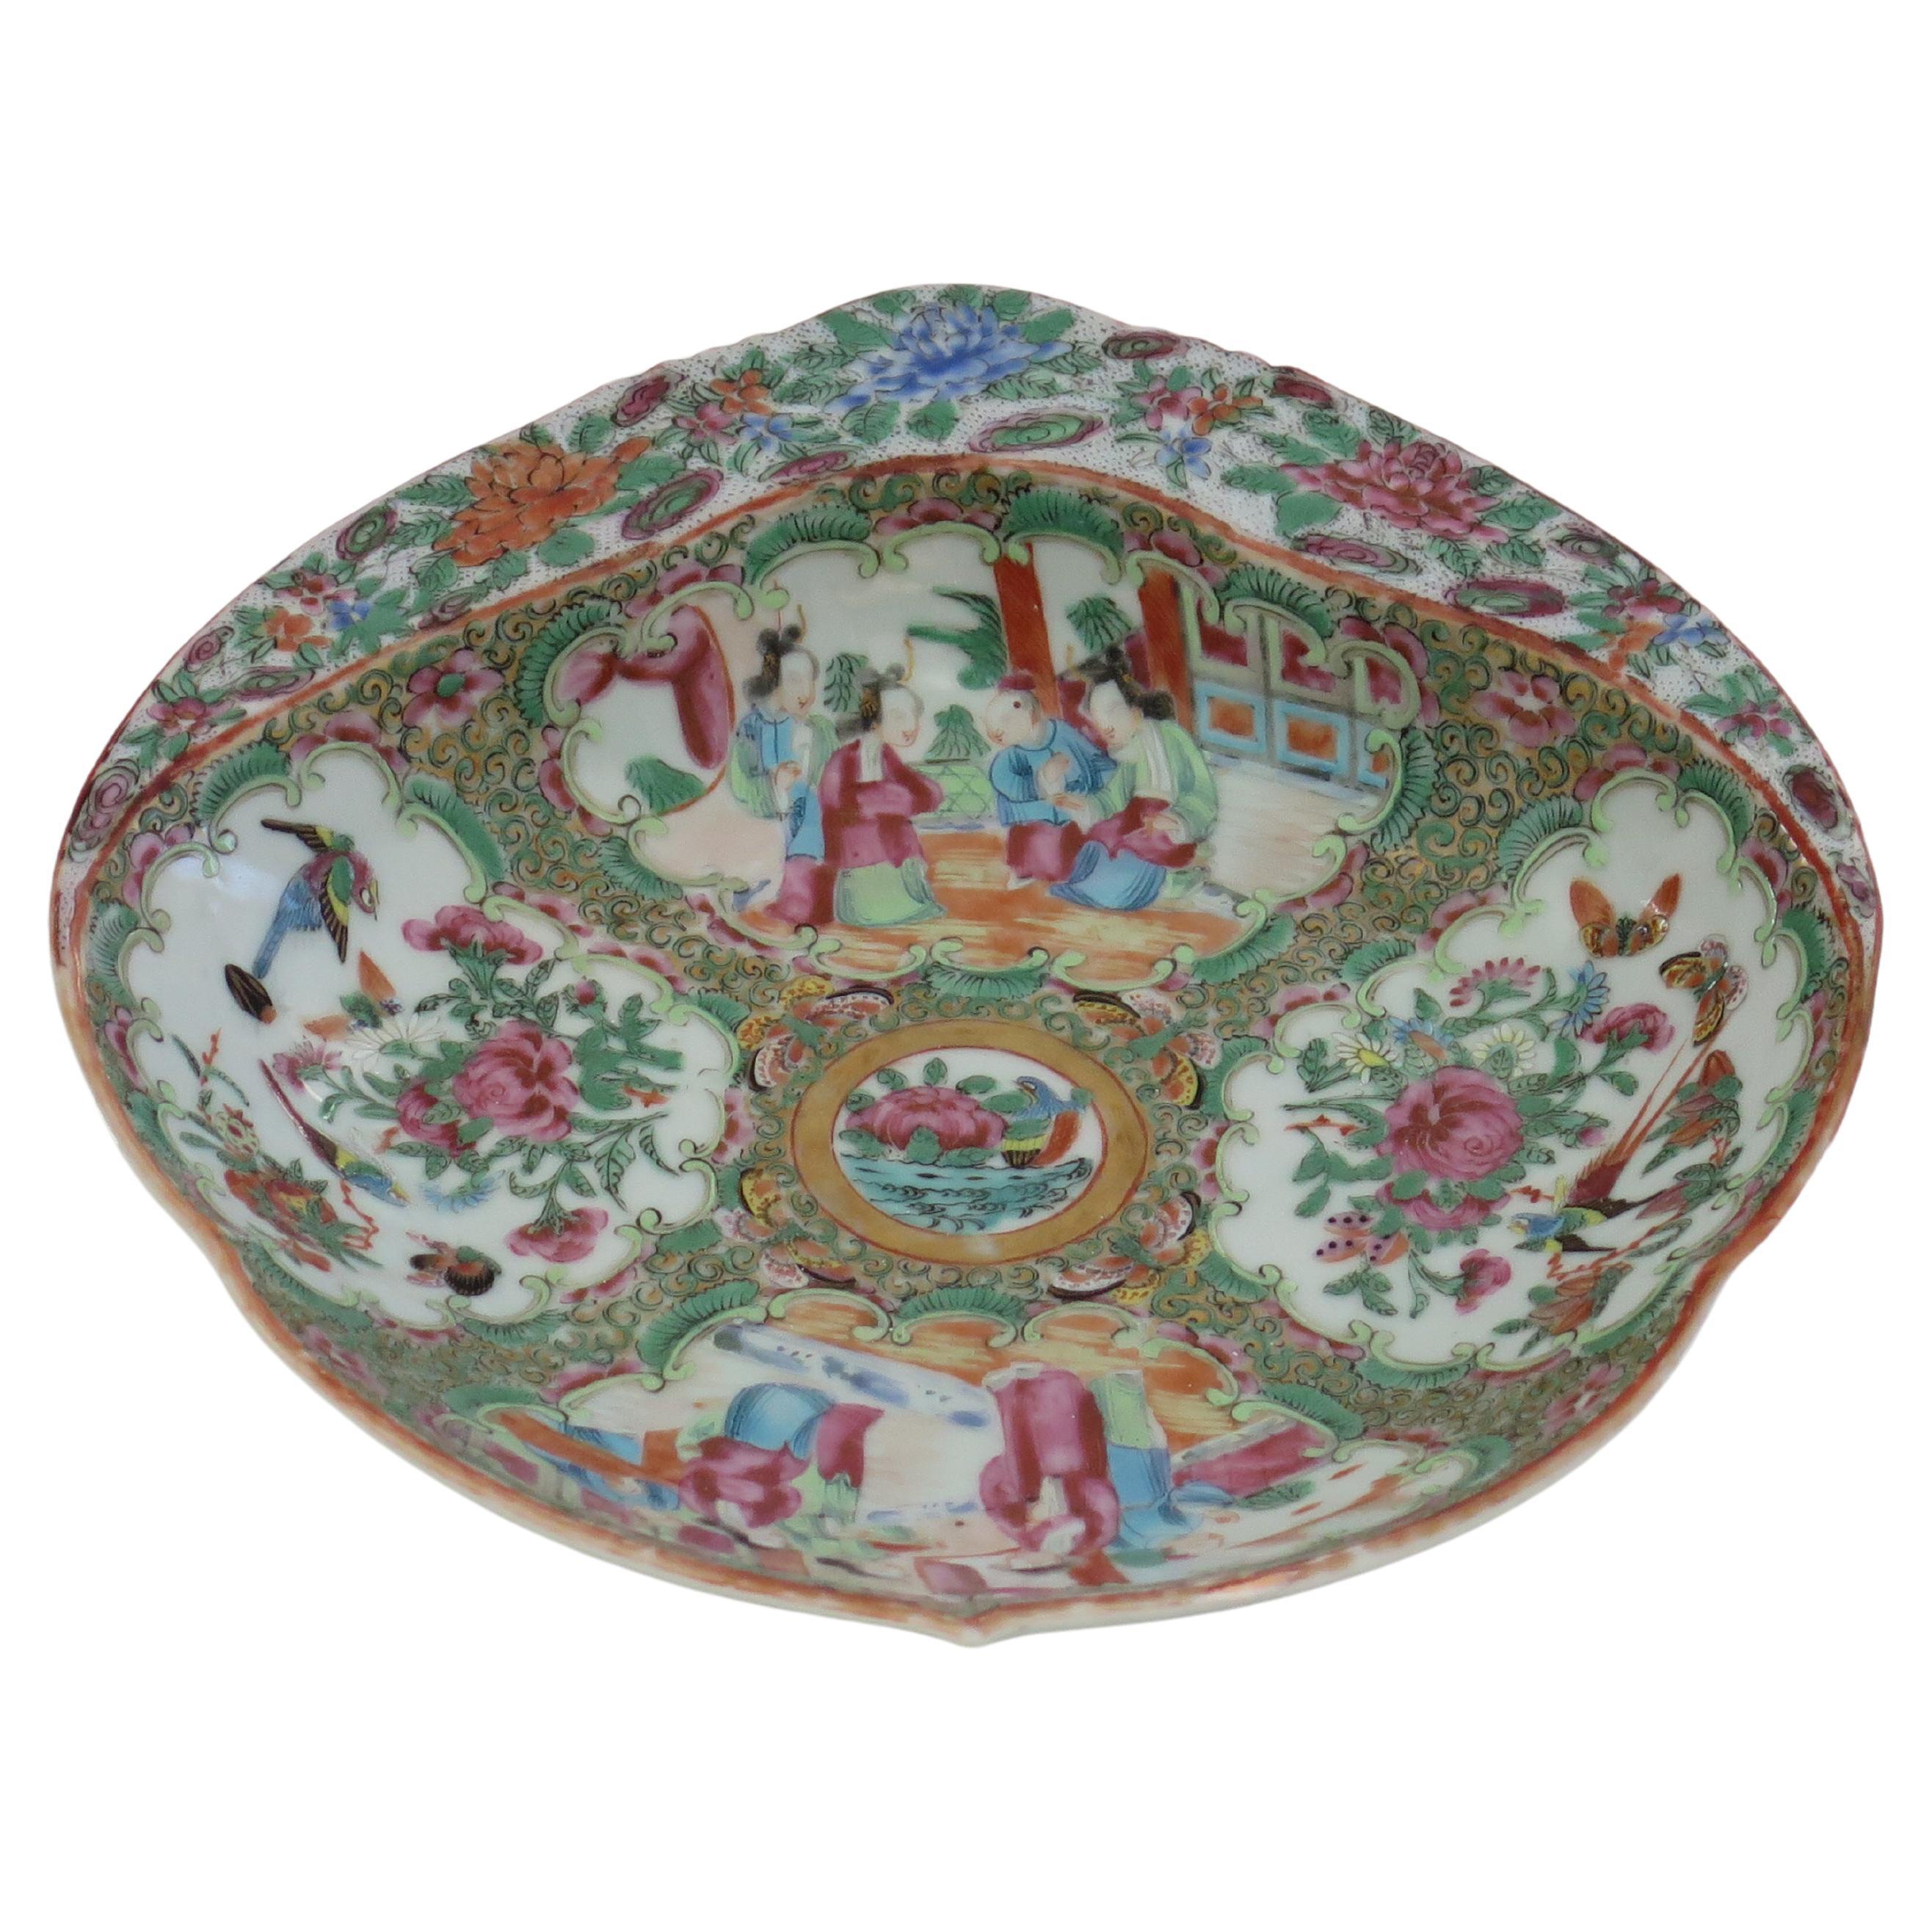 This is a very decorative, good quality Chinese export, porcelain, Large Shrimp or Serving Dish beautifully hand decorated in a Rose Medallion Pattern, which we date to the early 19th century, Qing dynasty, circa 1810.

The Dish is fairly deep and